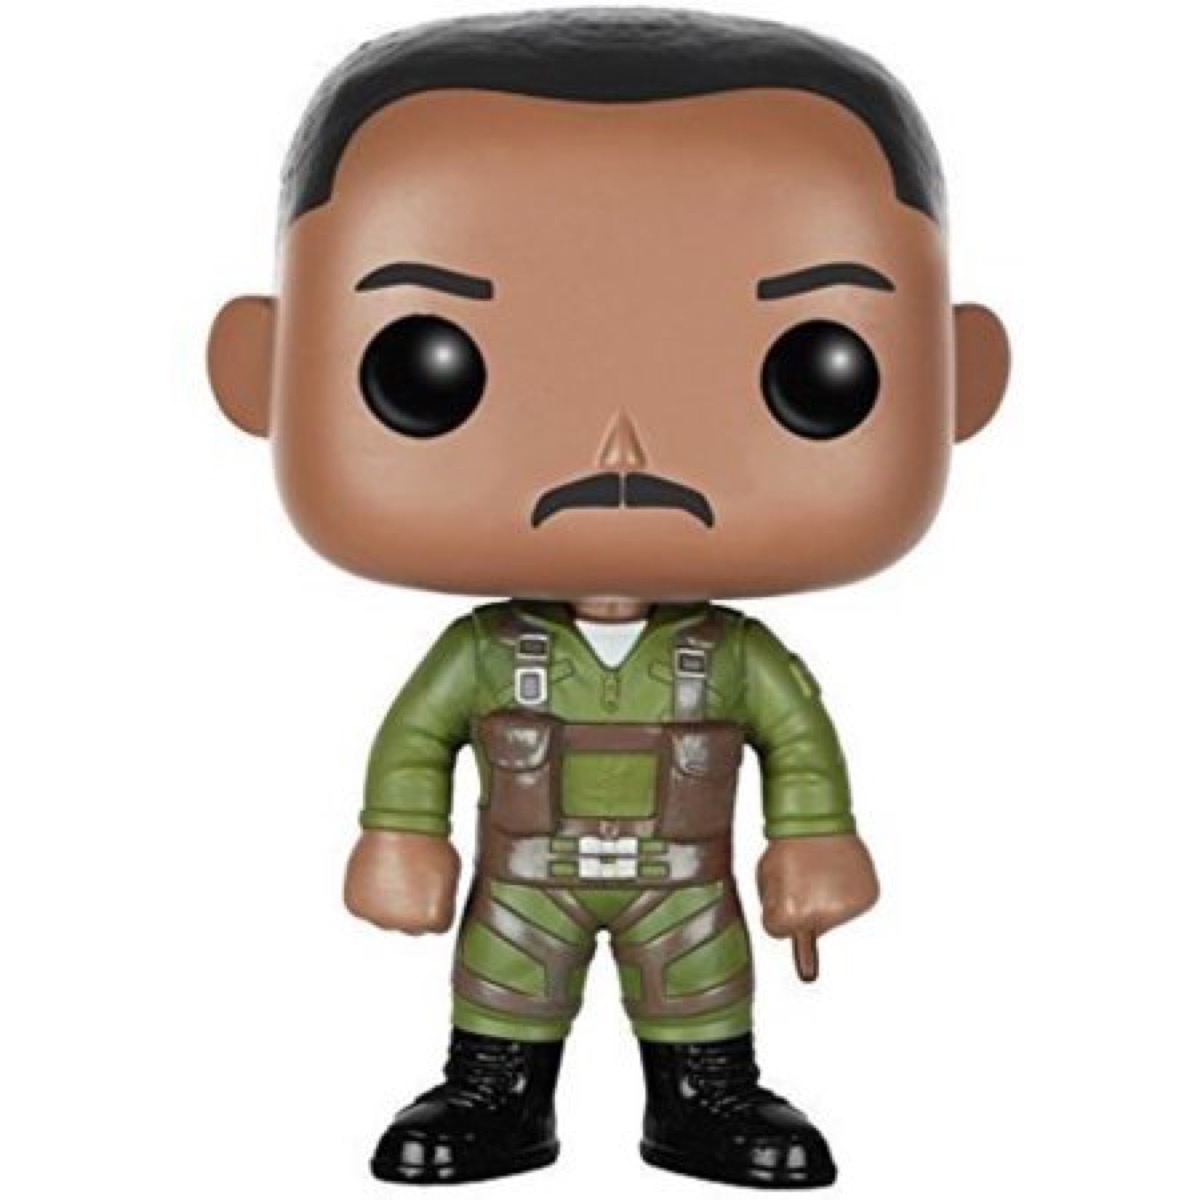 will smith funko pop figure, independence day gifts